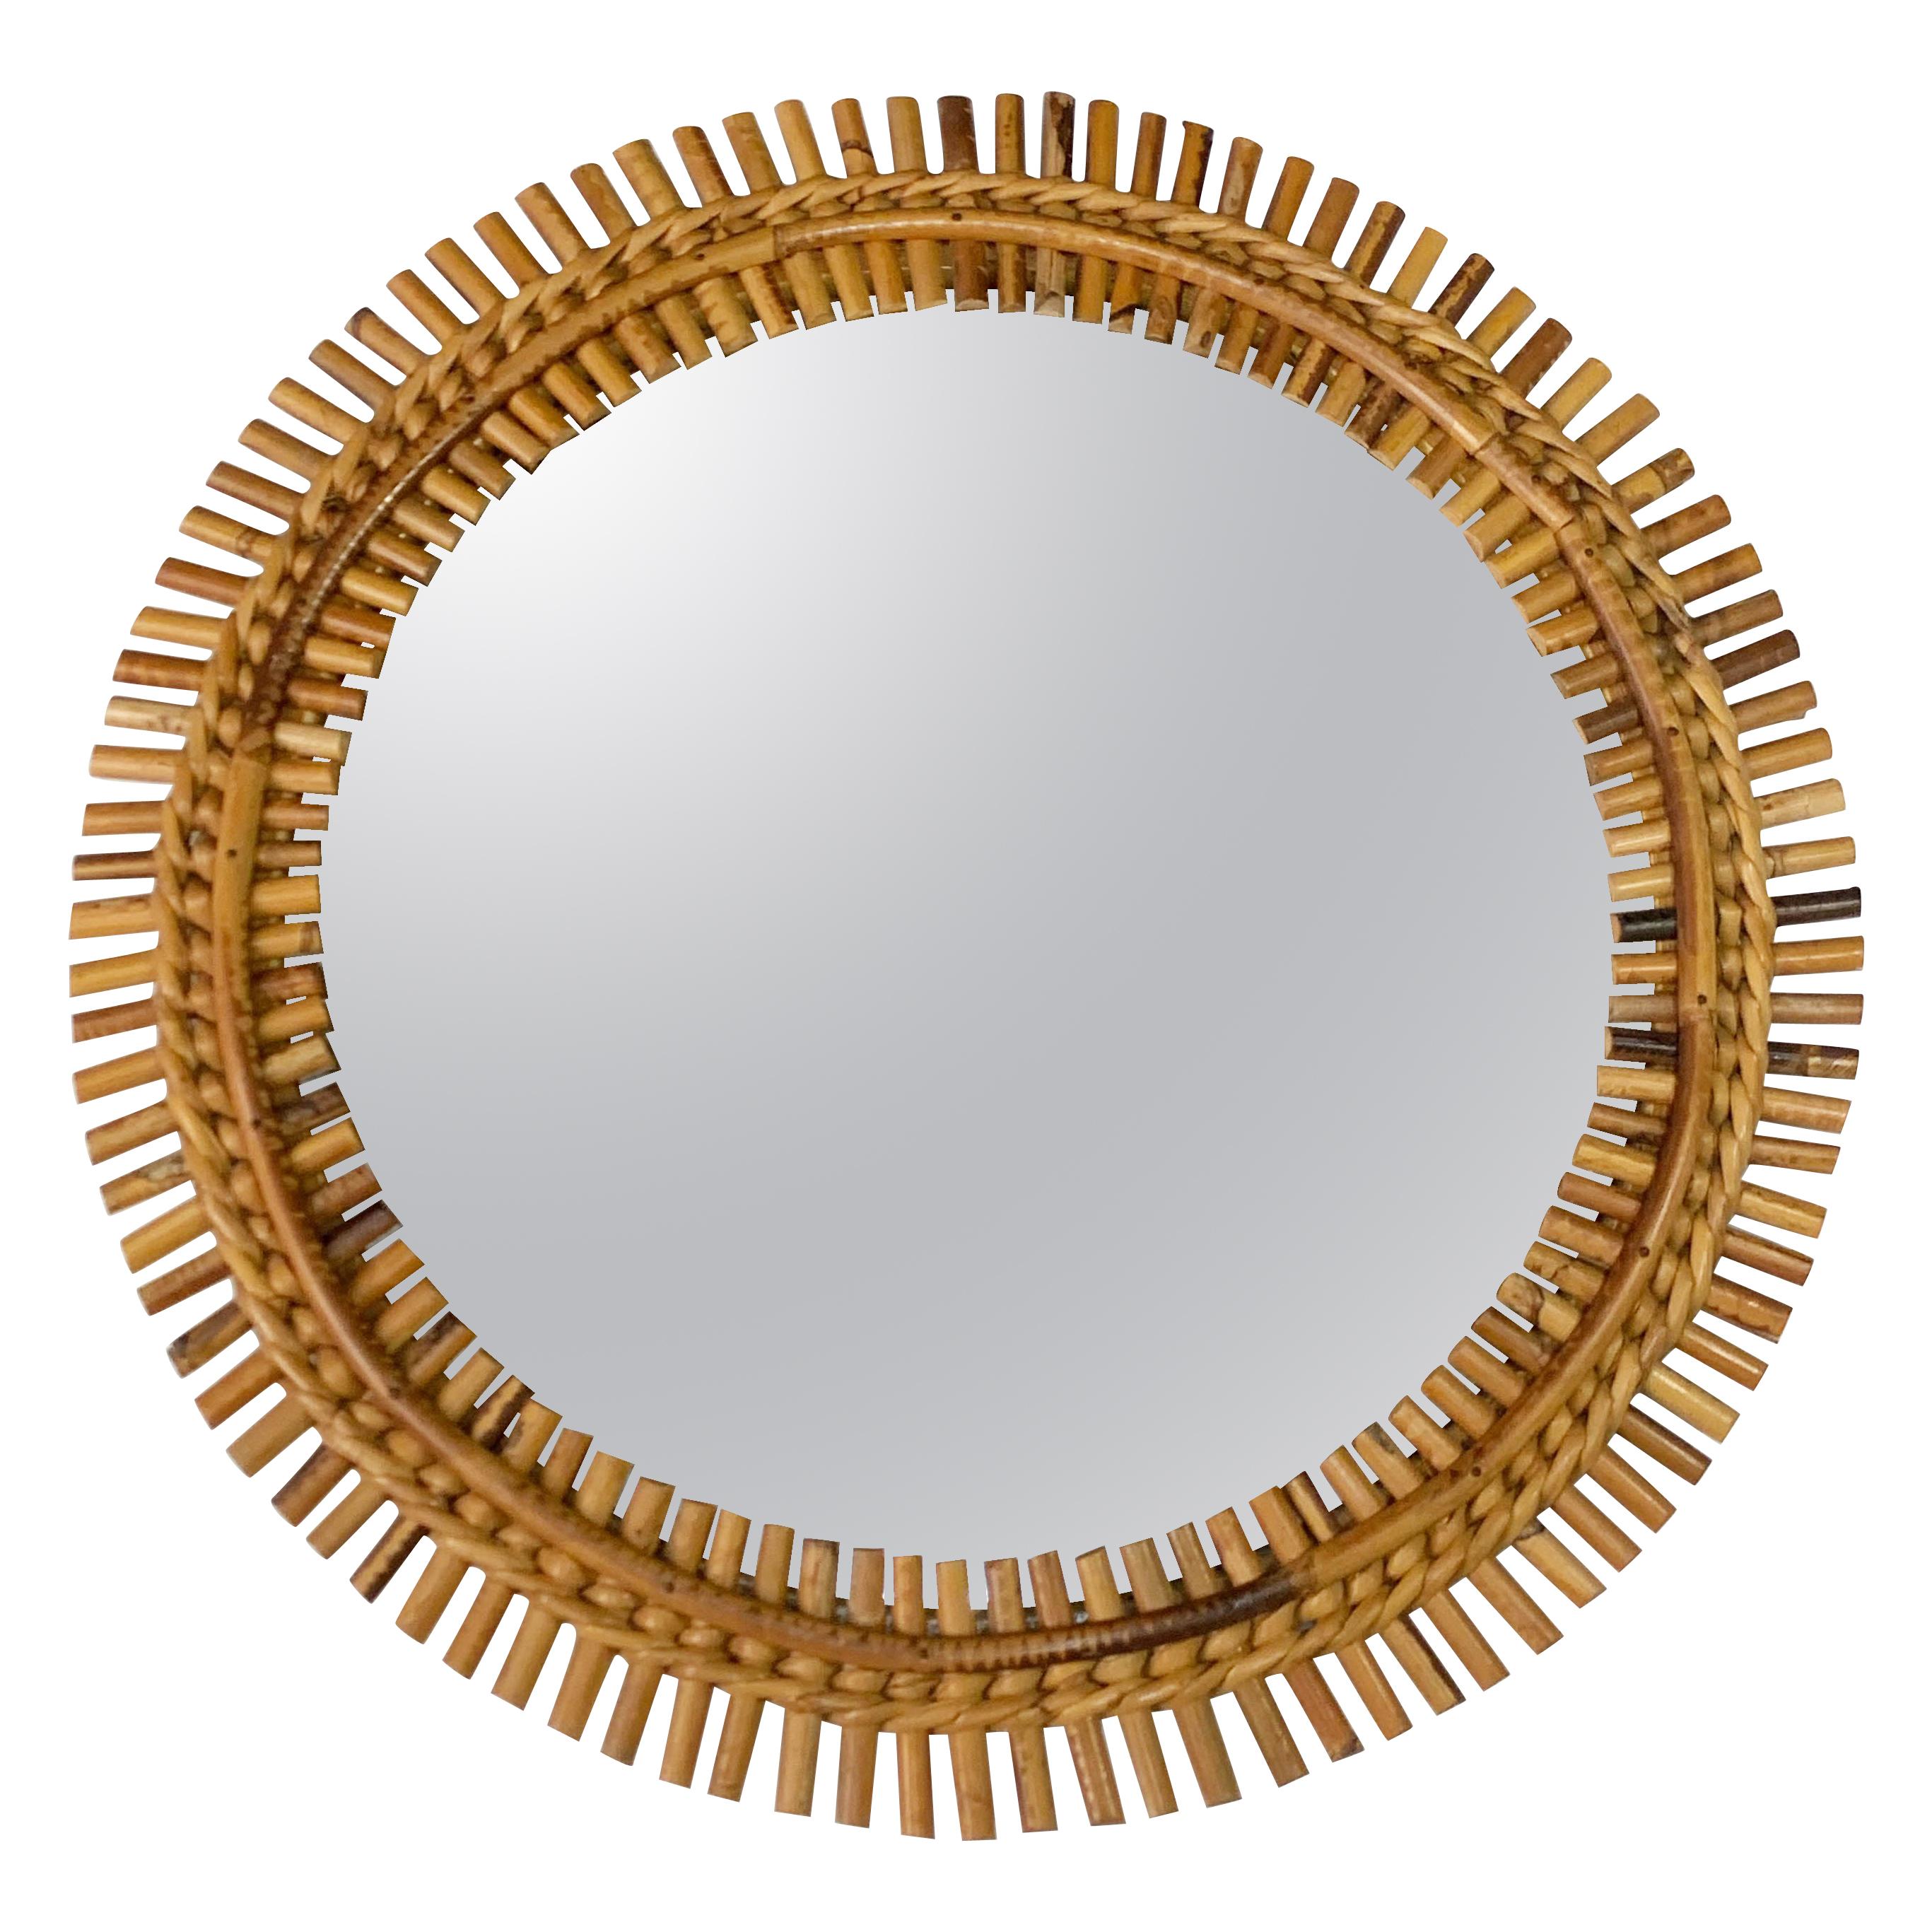 Midcentury French Riviera Bamboo and Rattan Round Wall Mirror, 1960s